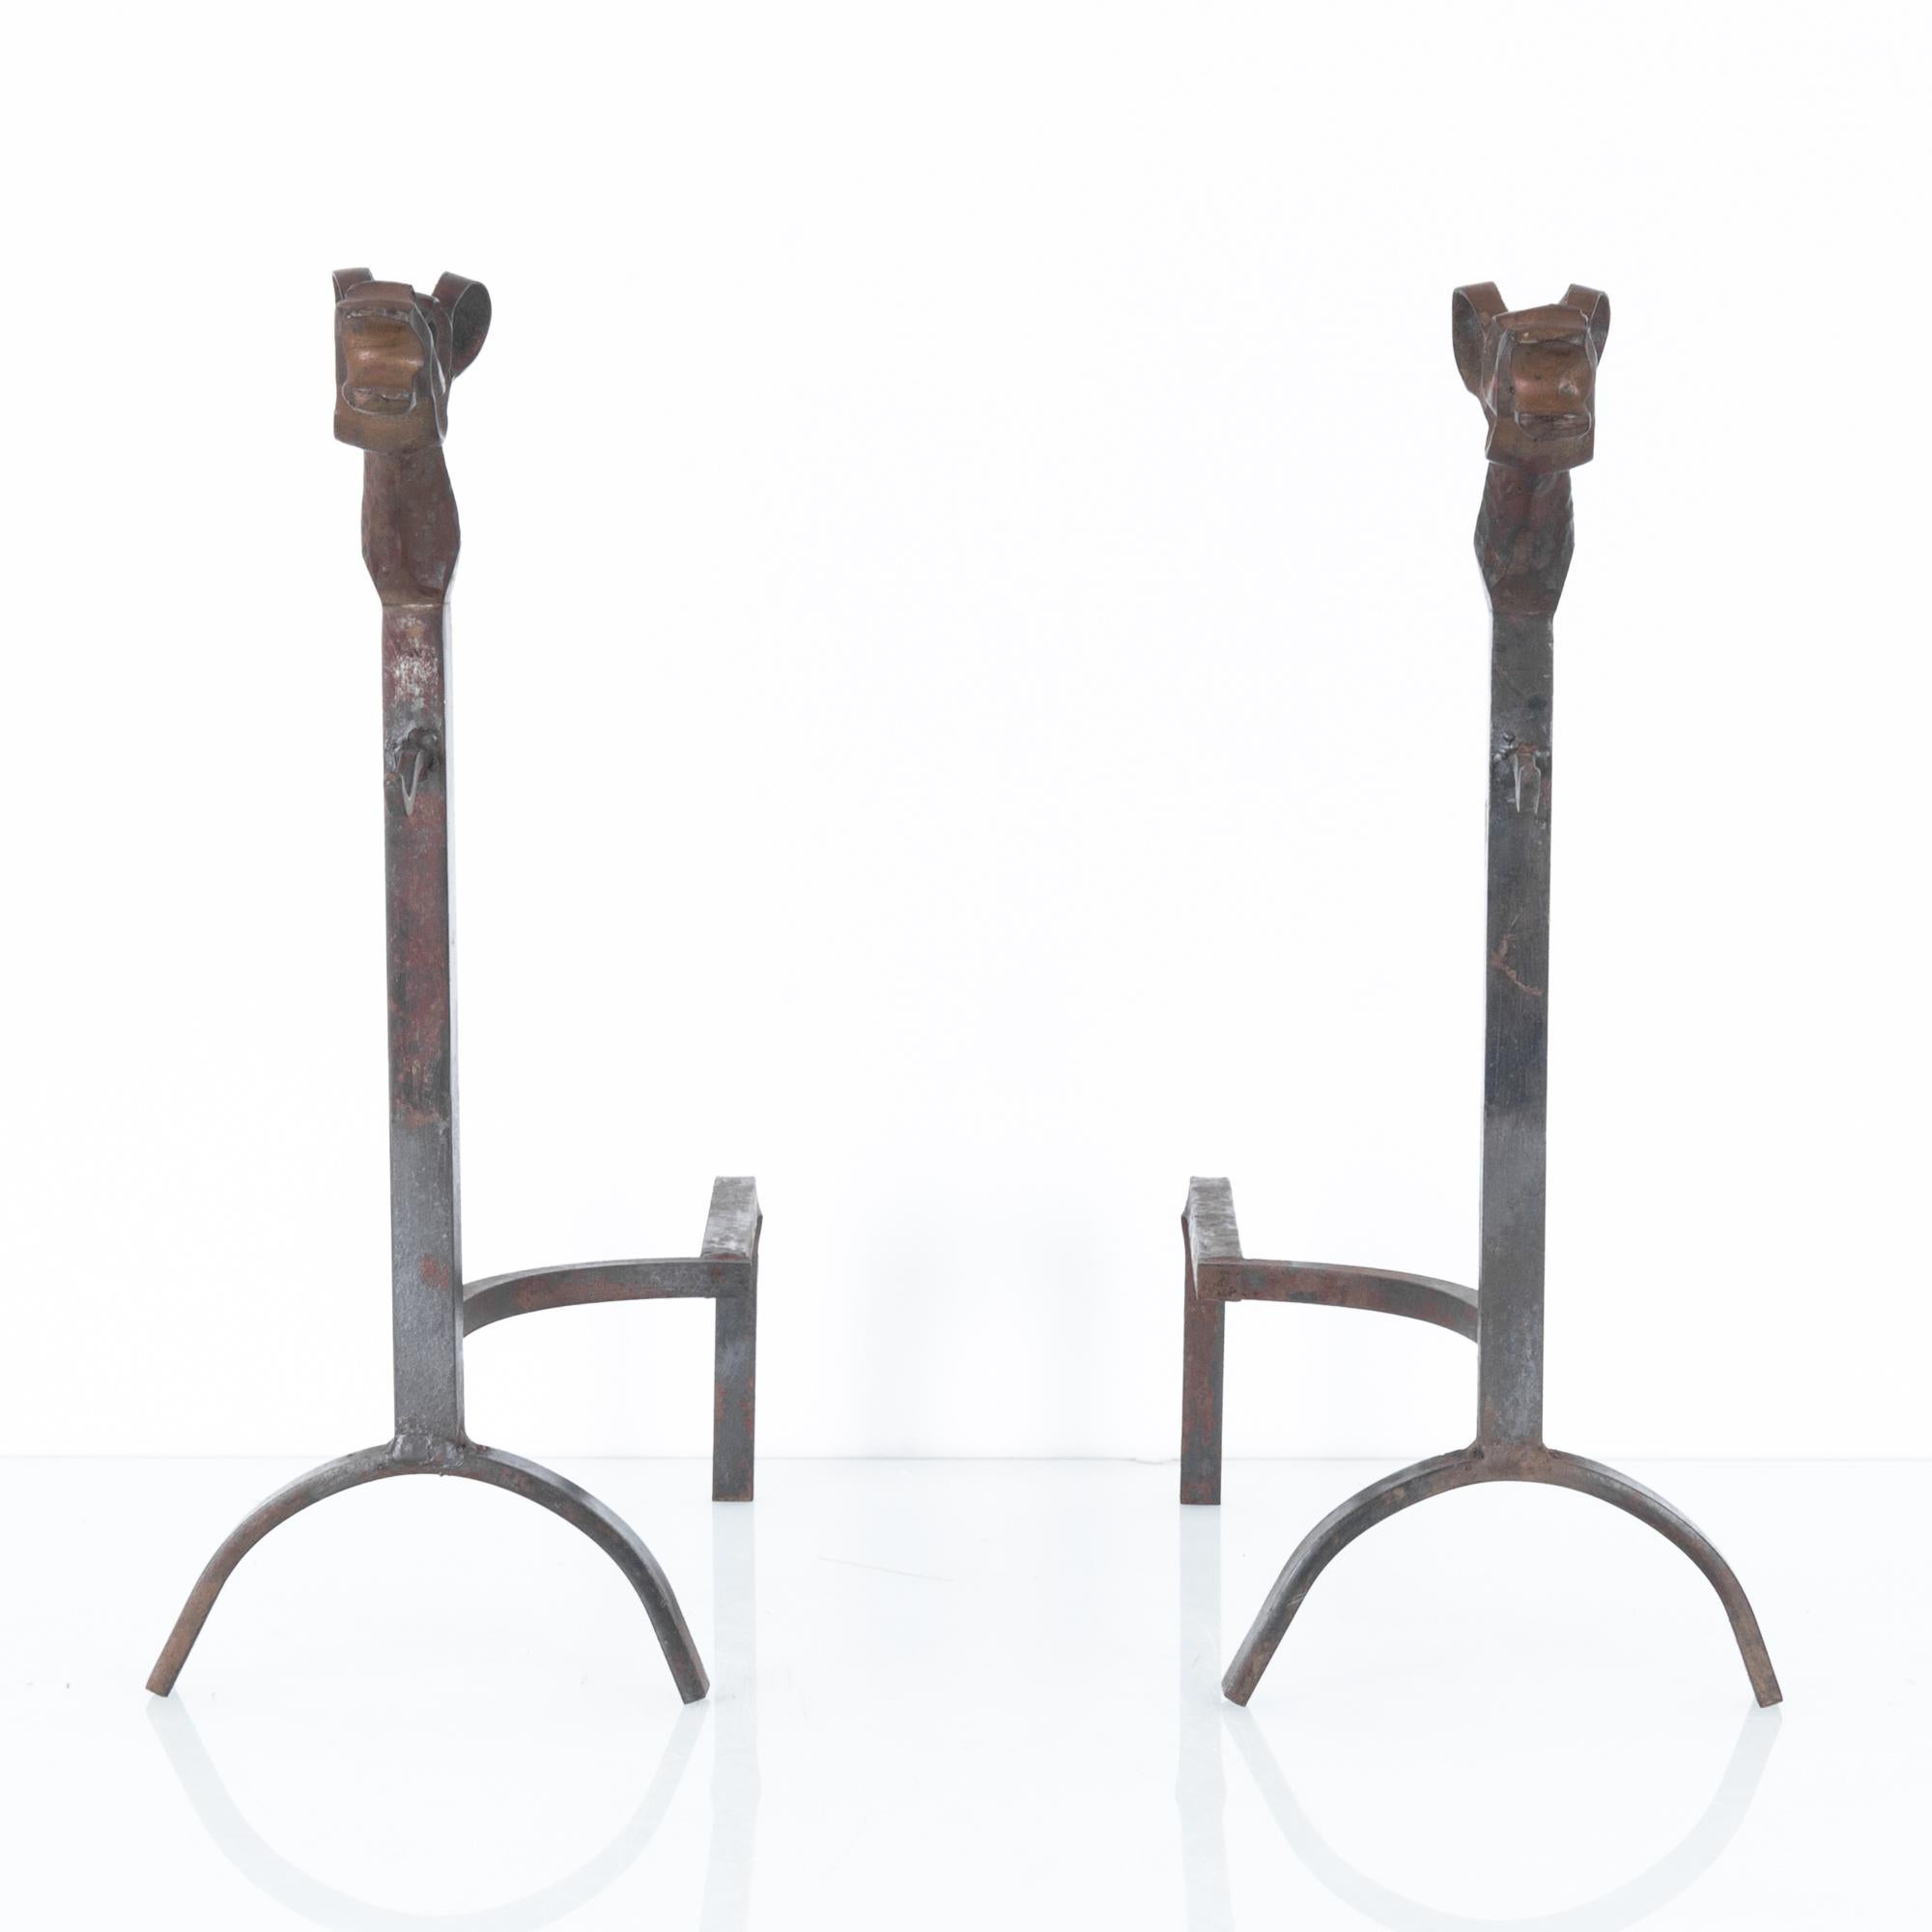 A pair of iron fire dogs from France, circa 1960. Two wrought iron brackets topped with open-mouthed iron animal heads. Originally used for burning logs in an open fire place, one bracket has a metal loop intended to support a poker and tongs. Small